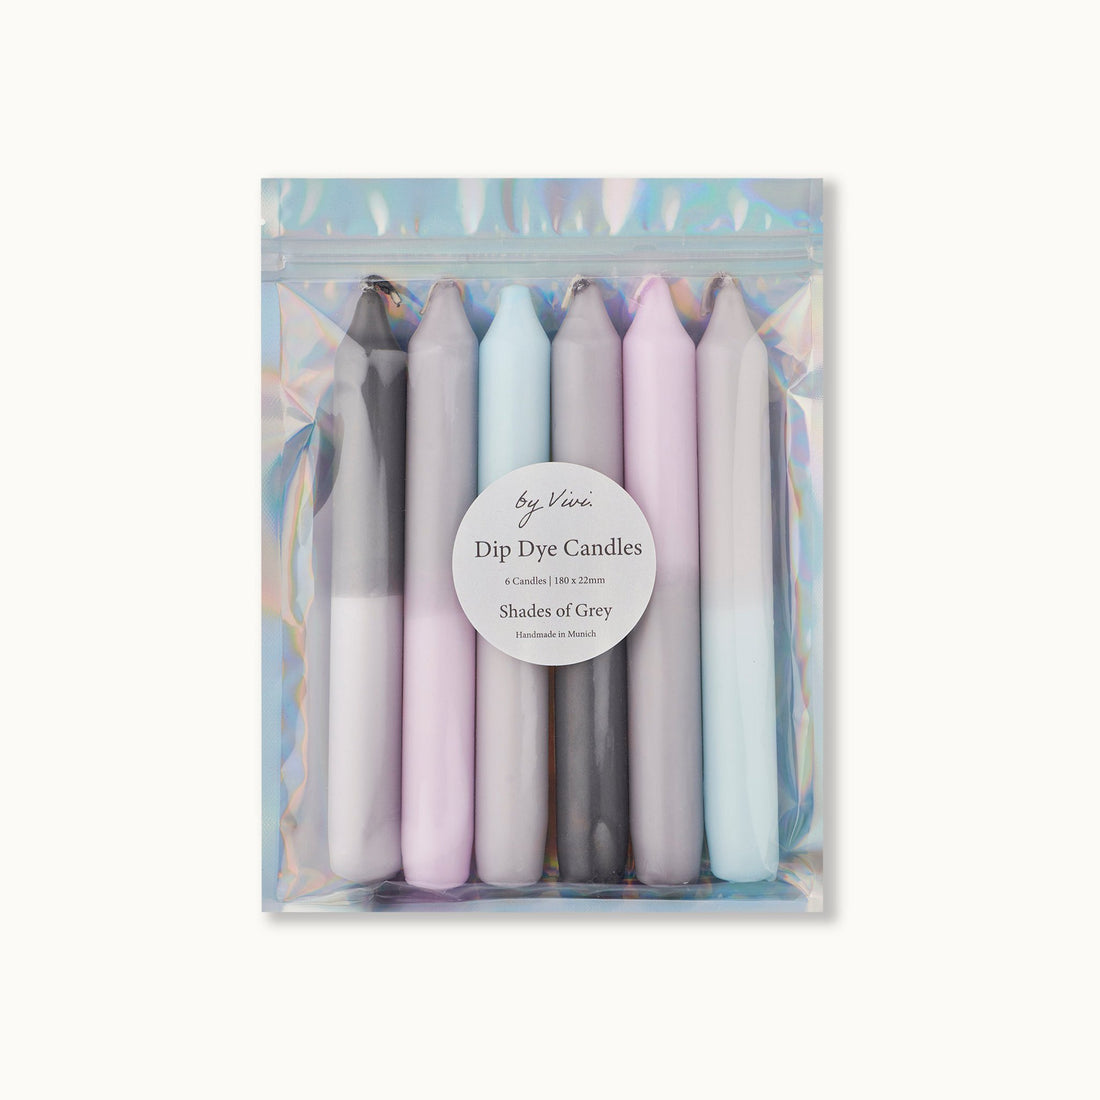 Dip dye candles in a set: Shades of Gray